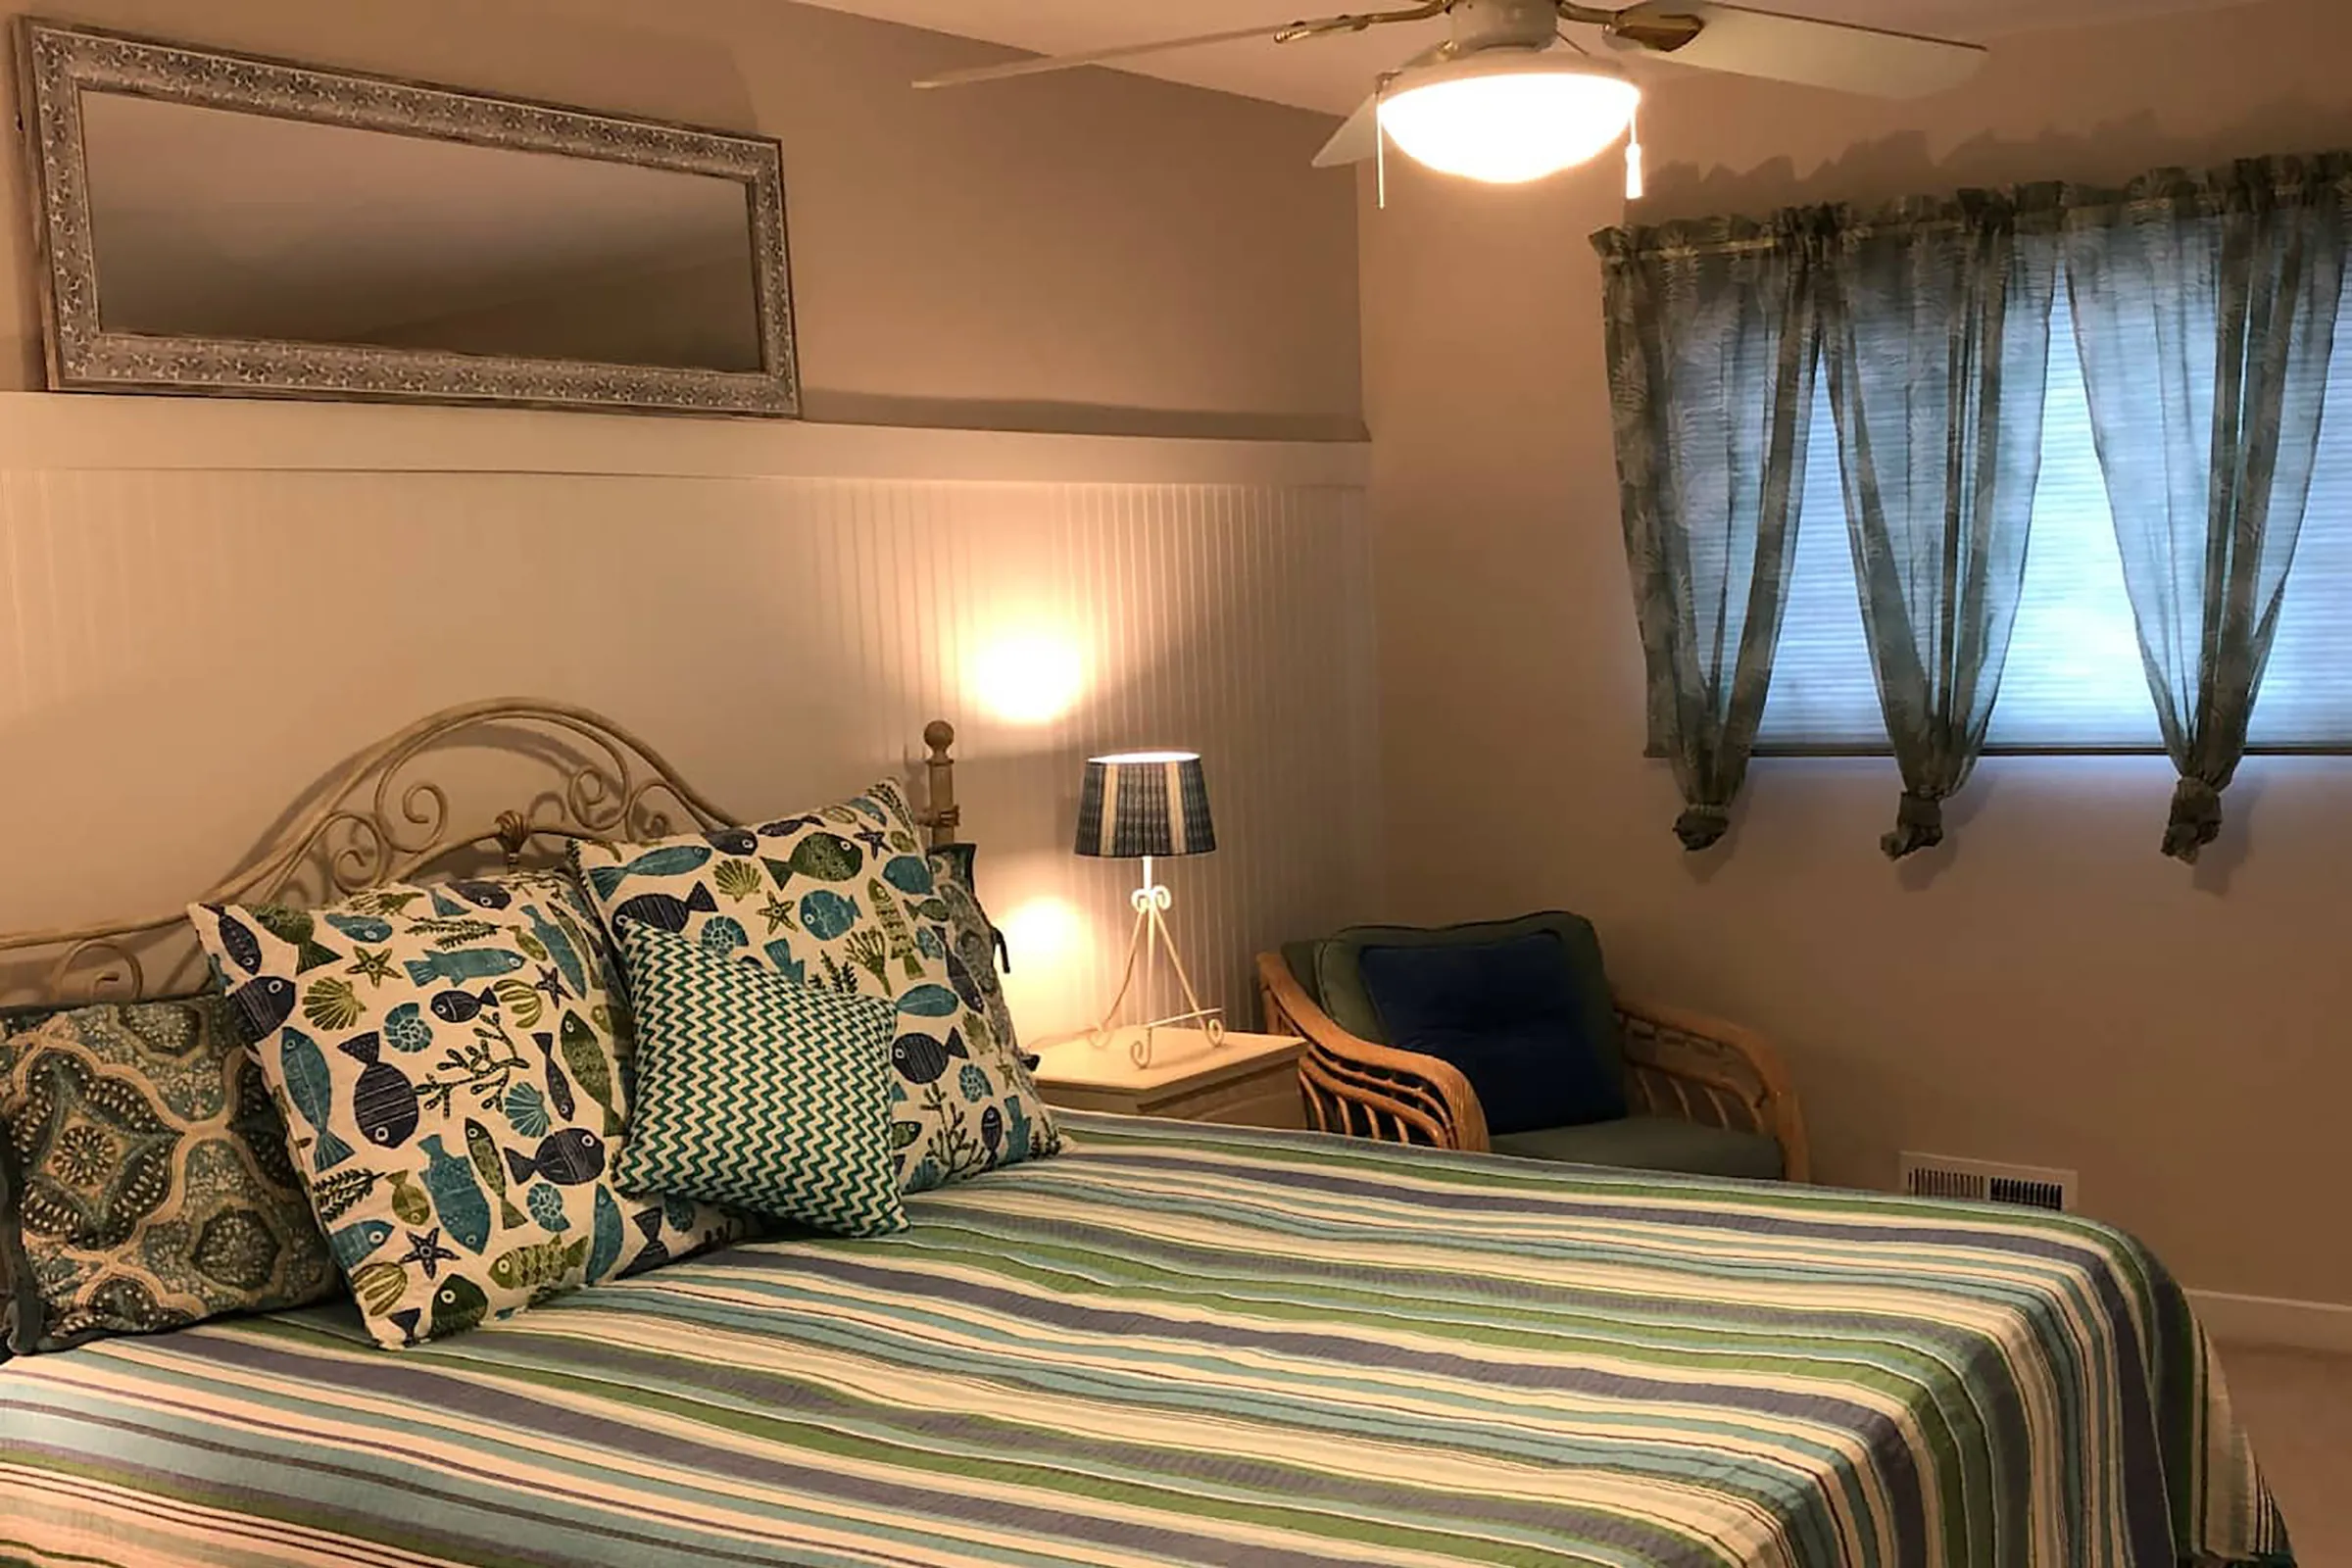 A bed with blue, green, and white striped comfortable. Next to the bed is a desk lamp and a lounge chair with wooden arms. 